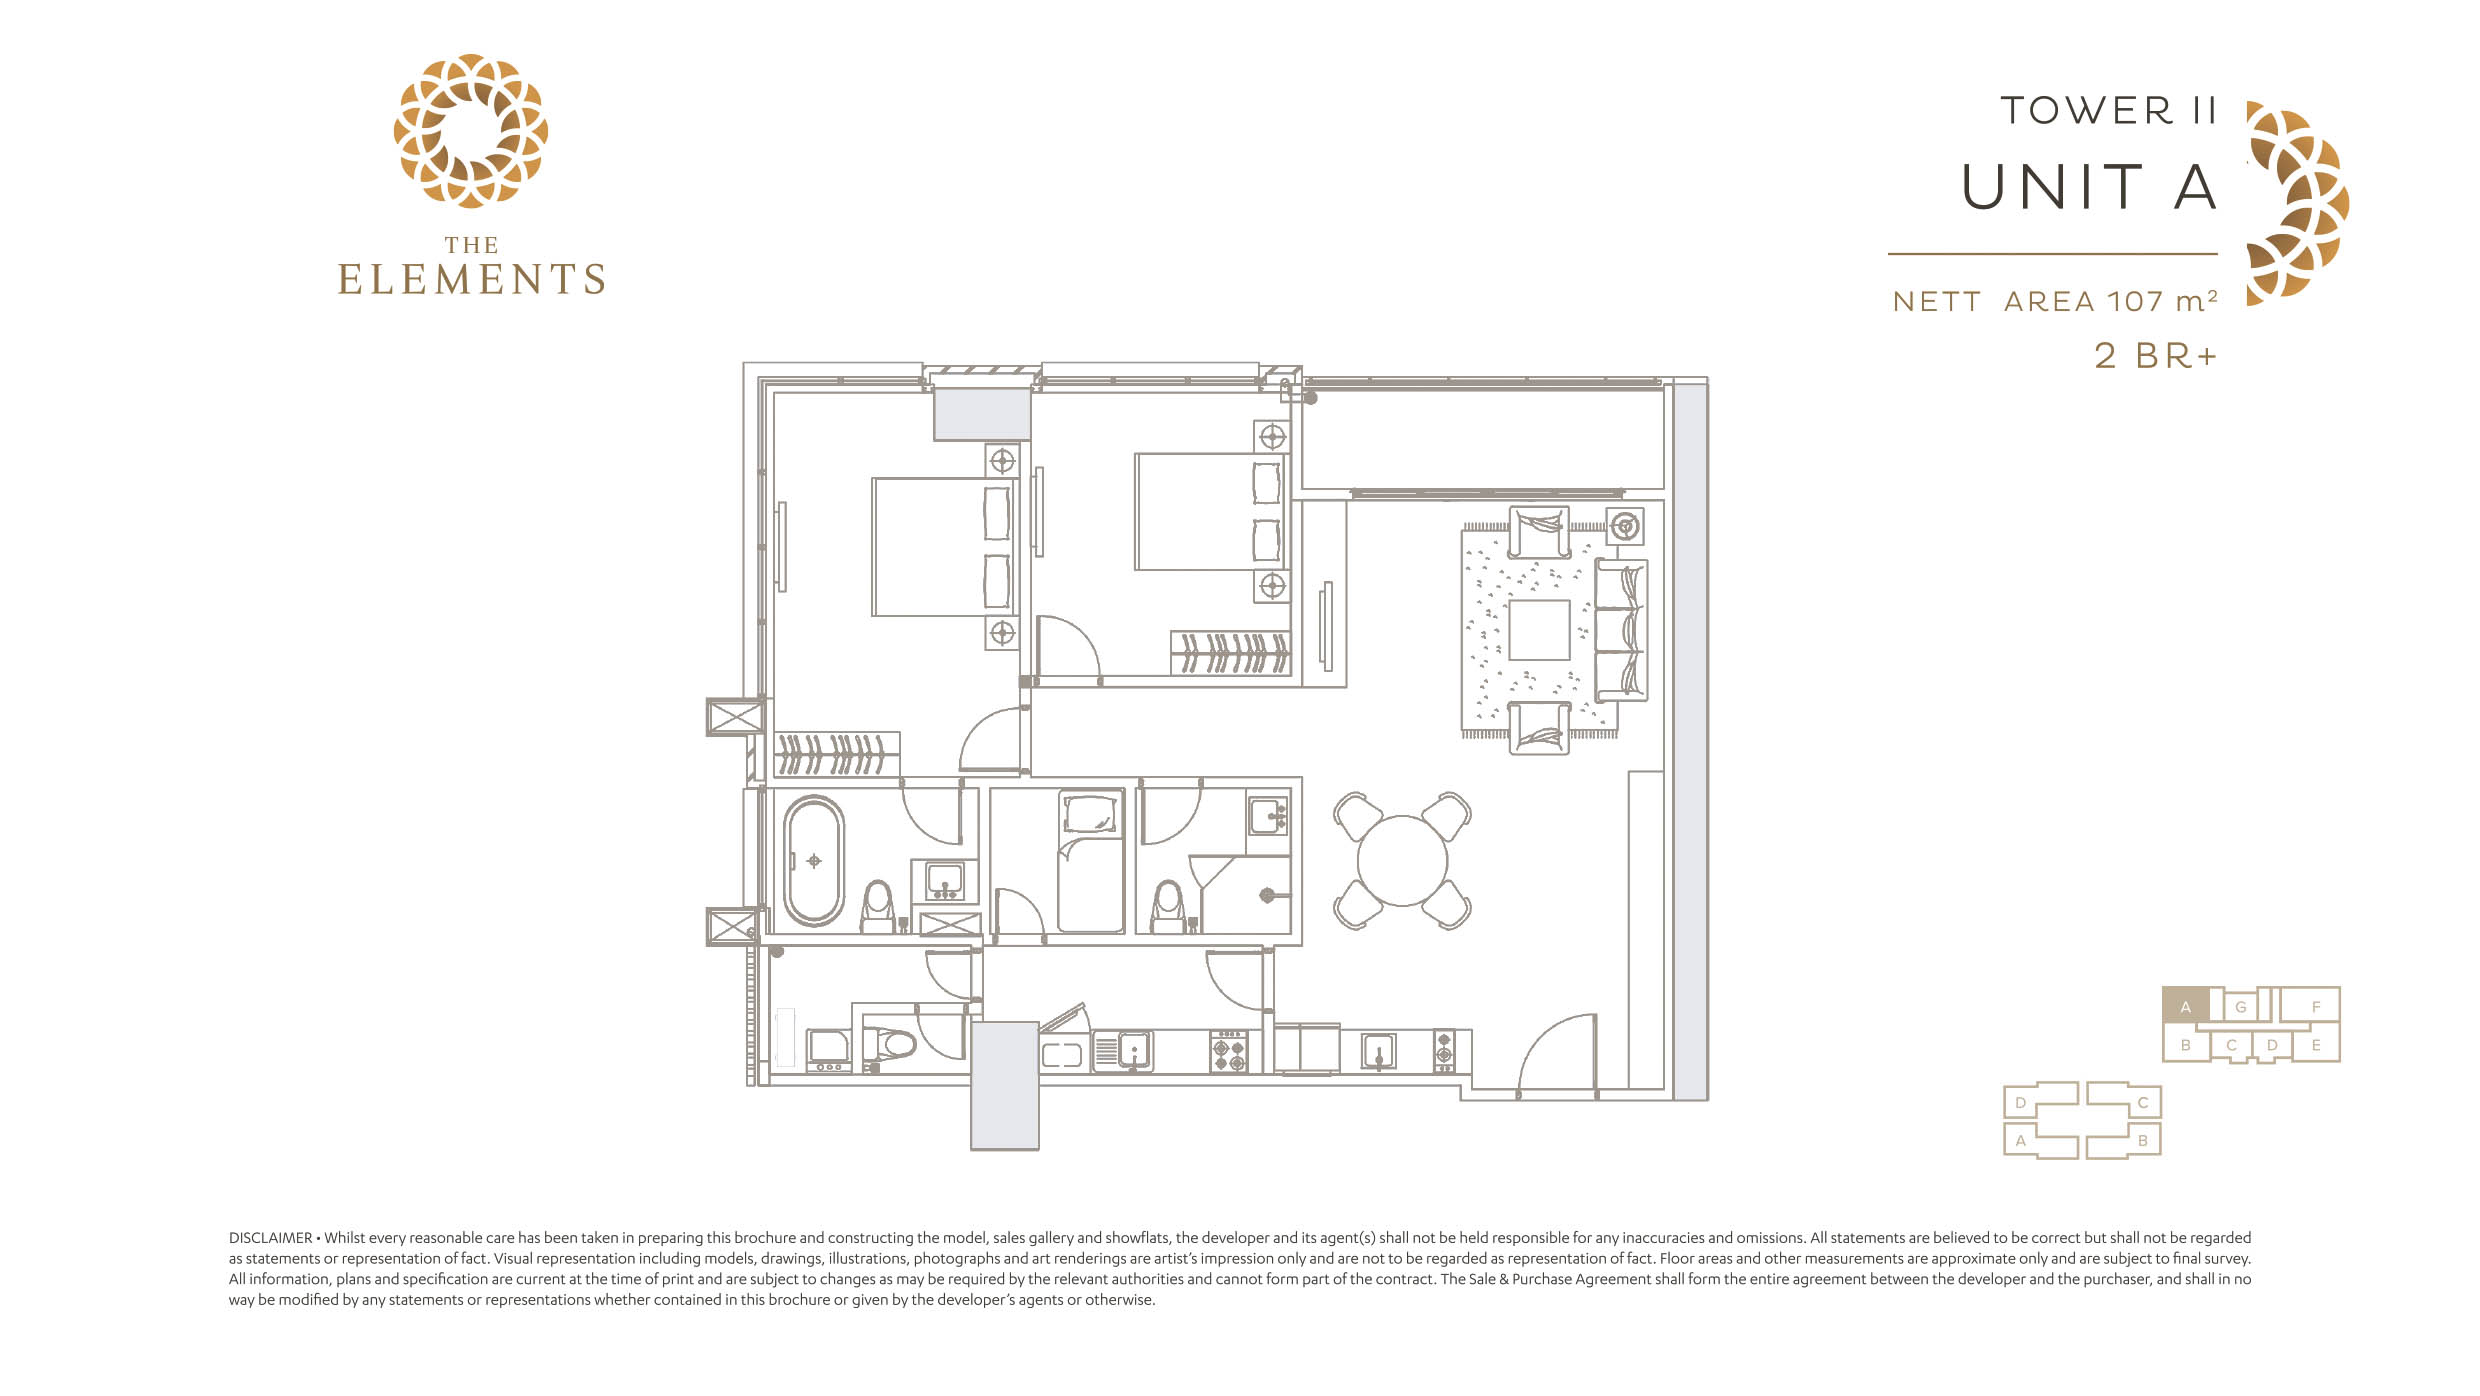 The Elements Harmony Tower - Unit A